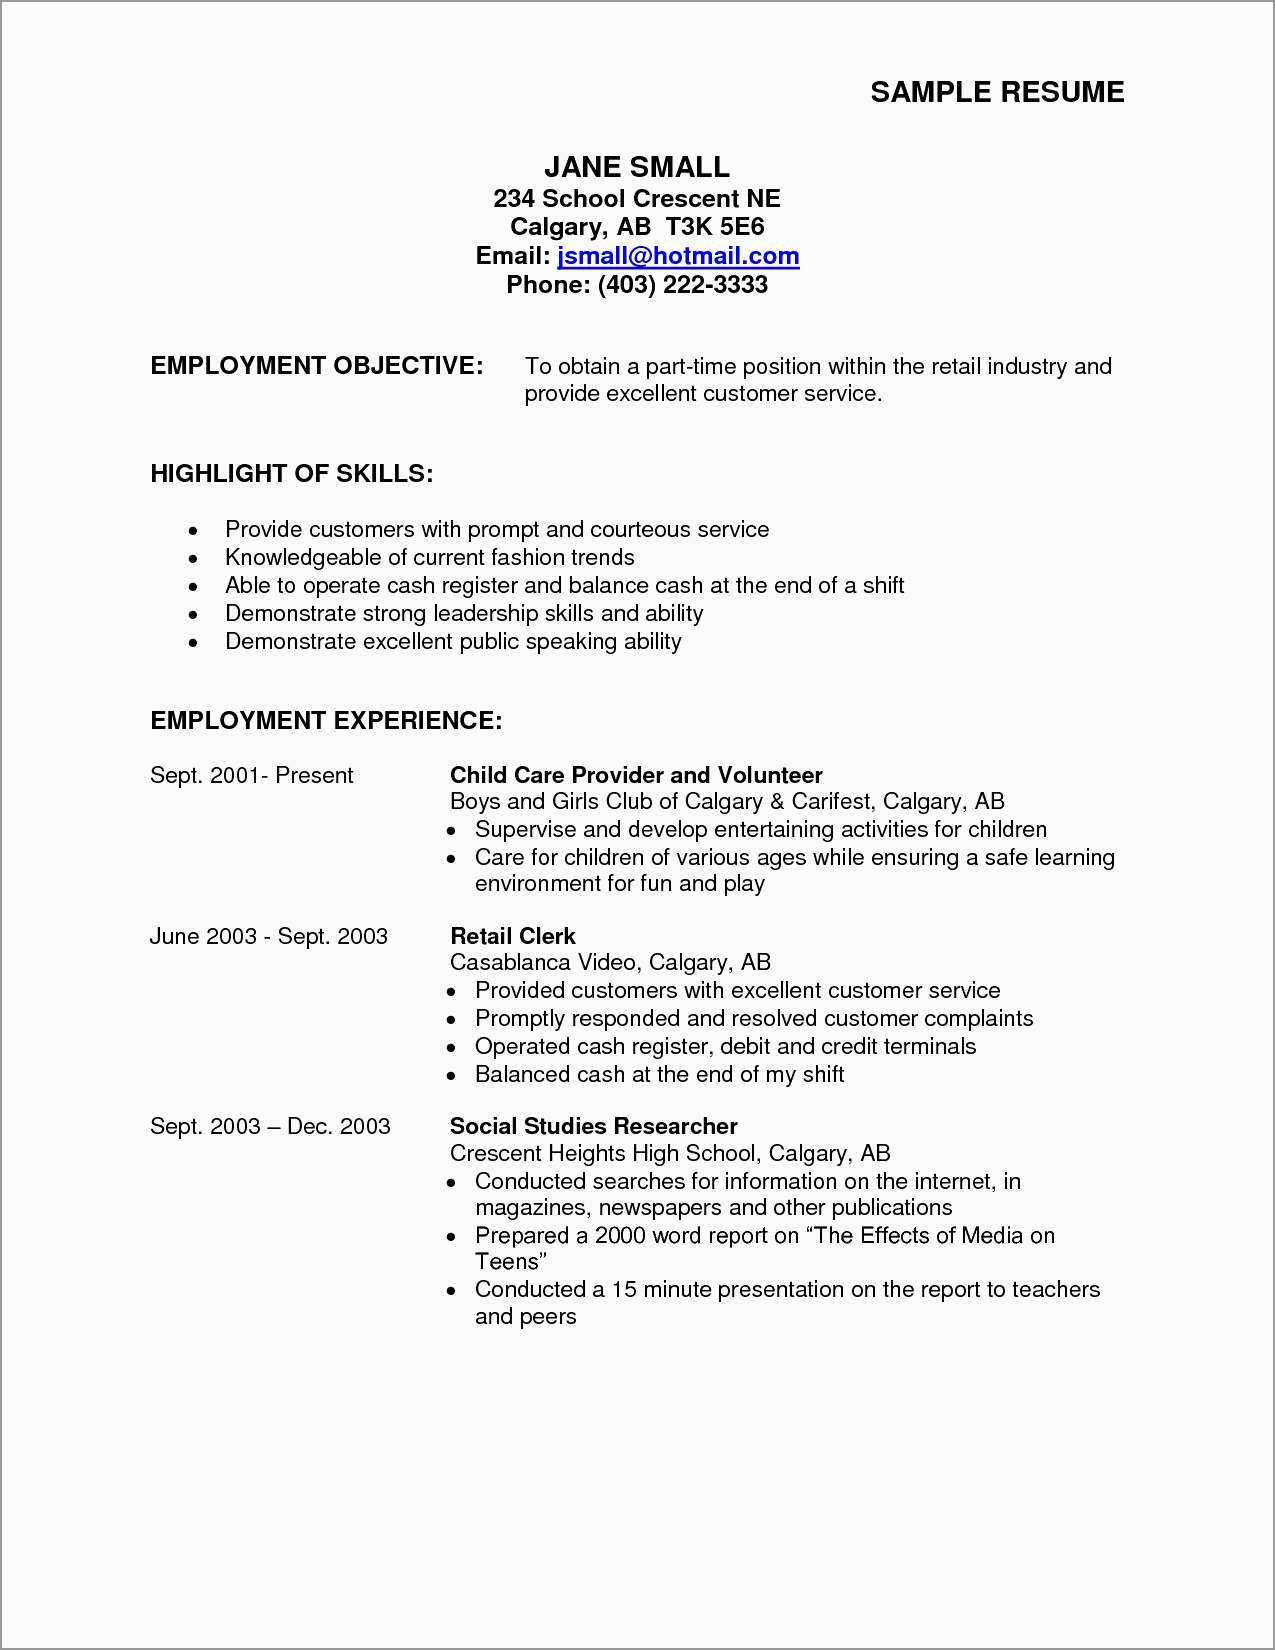 Sample Resume Objective for Part Time Job Resume ~ Part Time Job Objective Inspirational Free Resume …